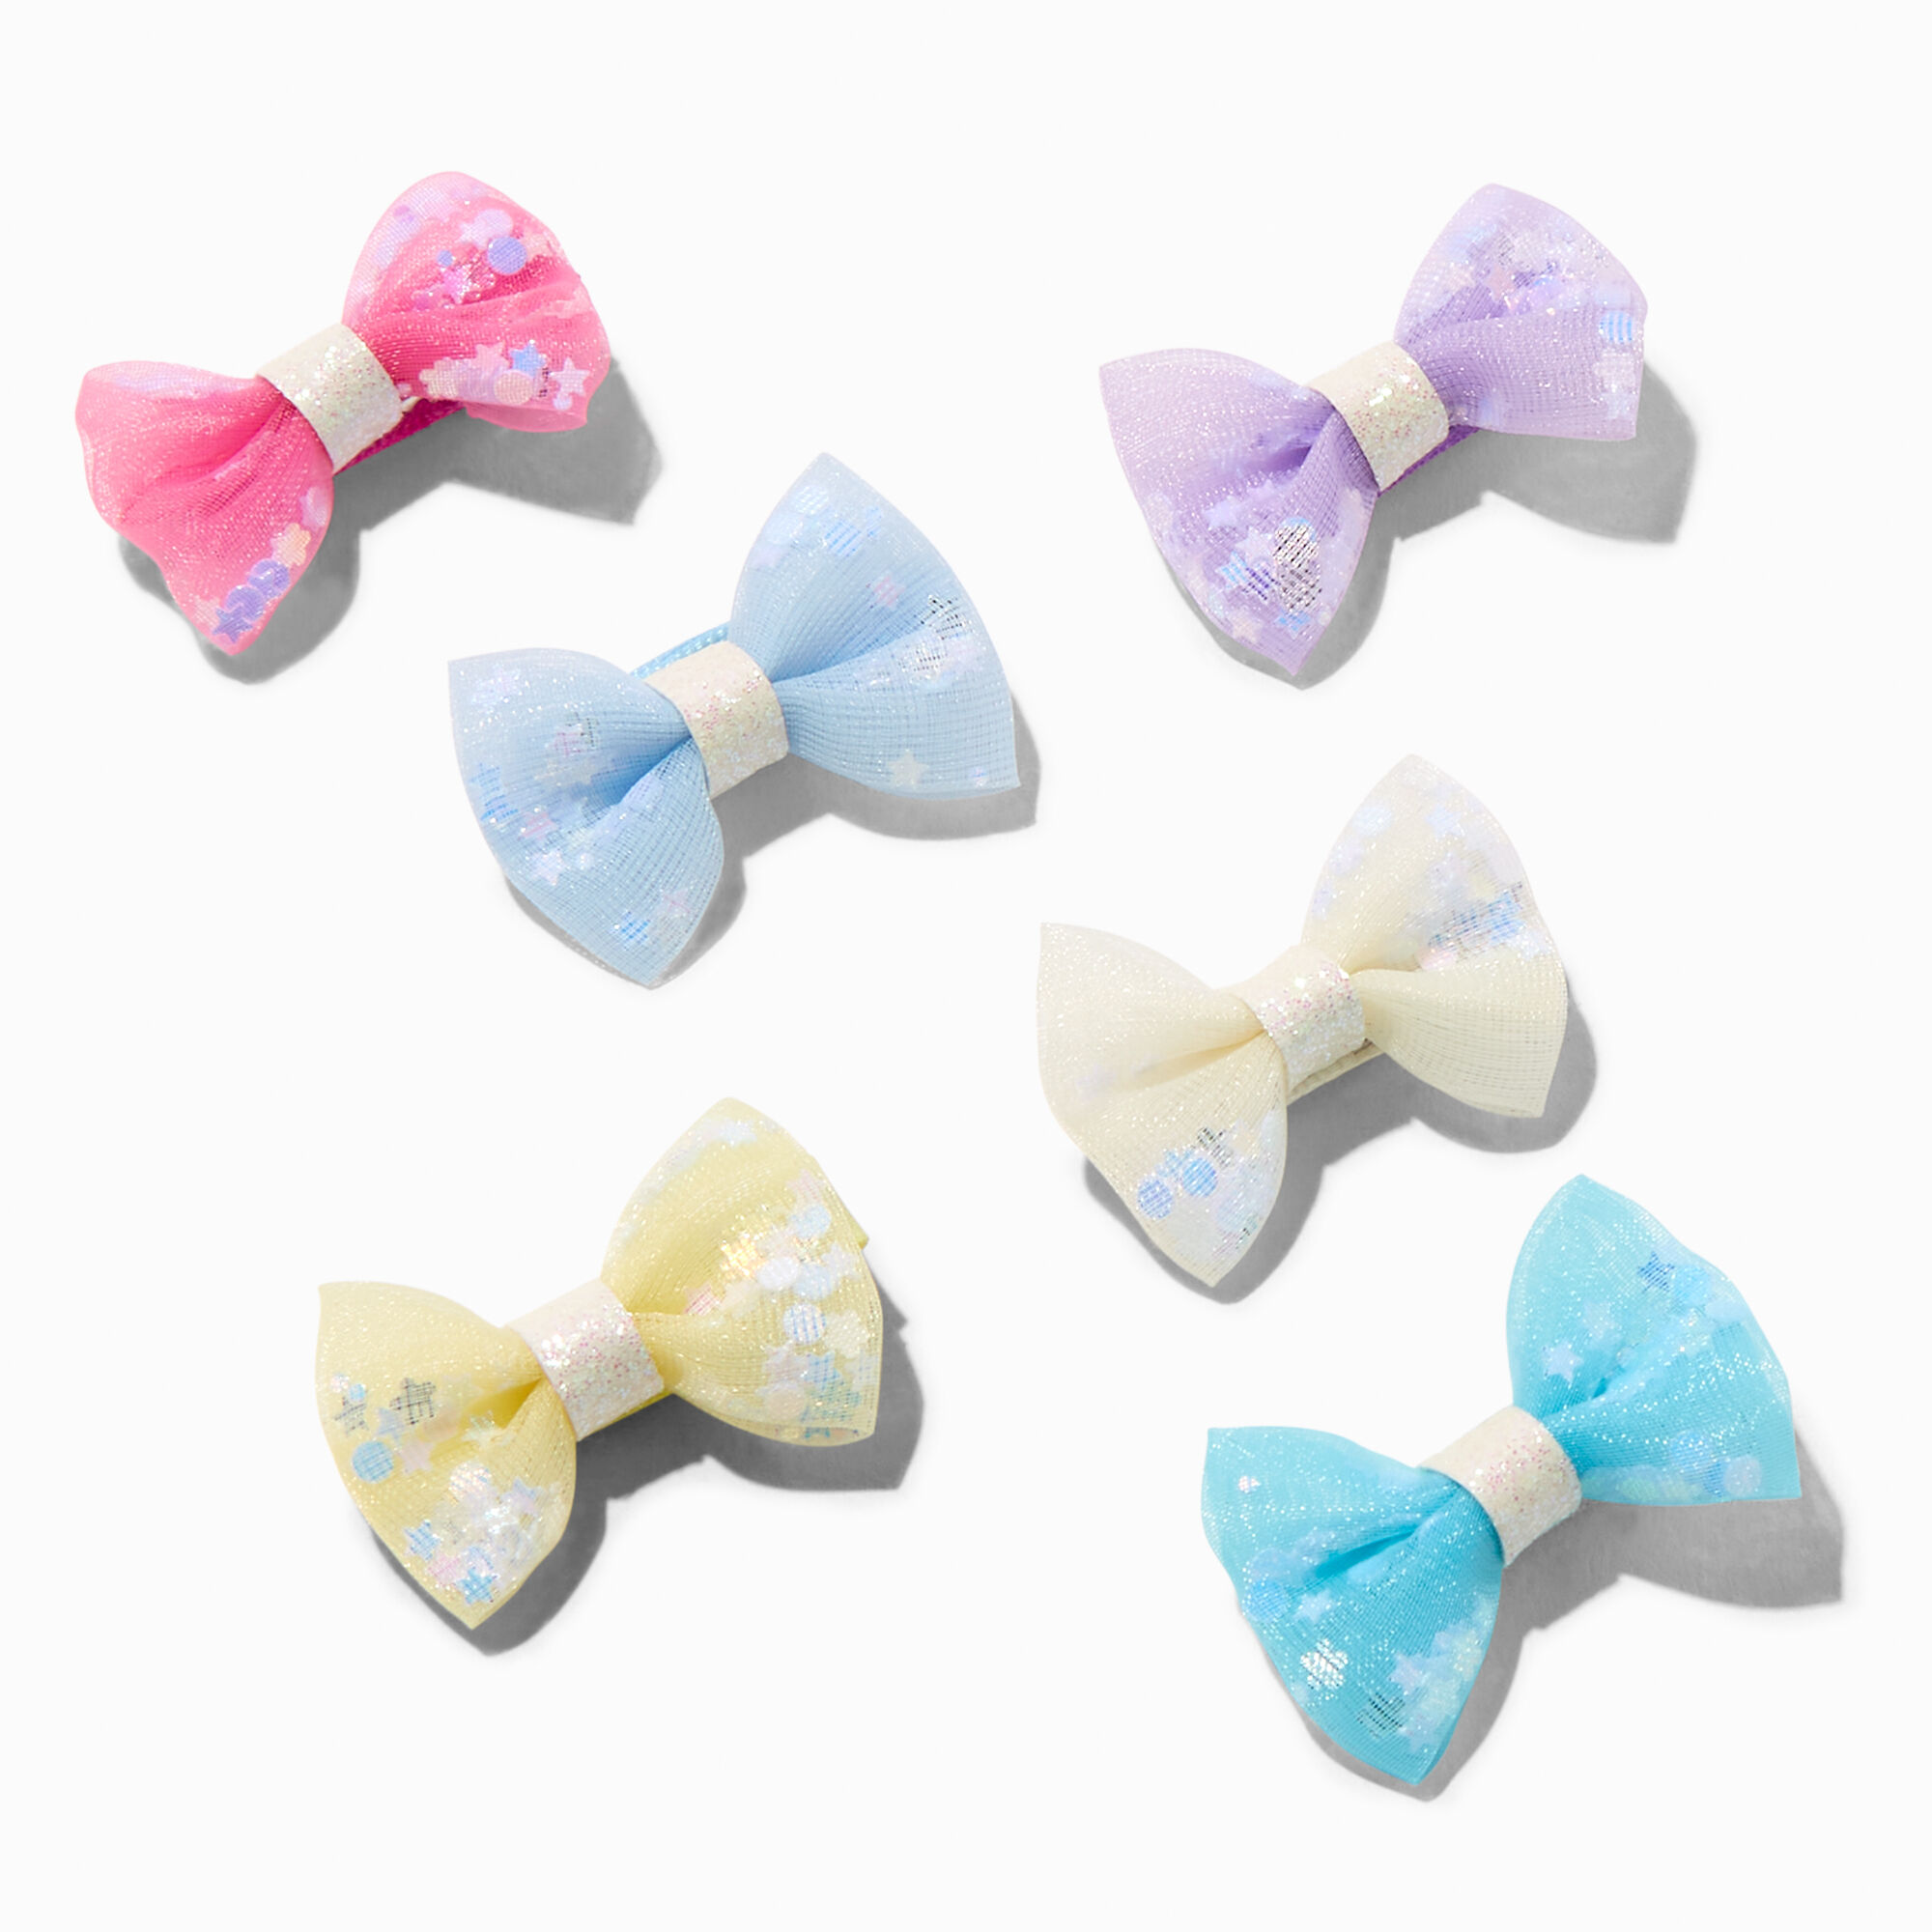 View Claires Club Pastel Star Sequin Hair Bow Clips 6 Pack information